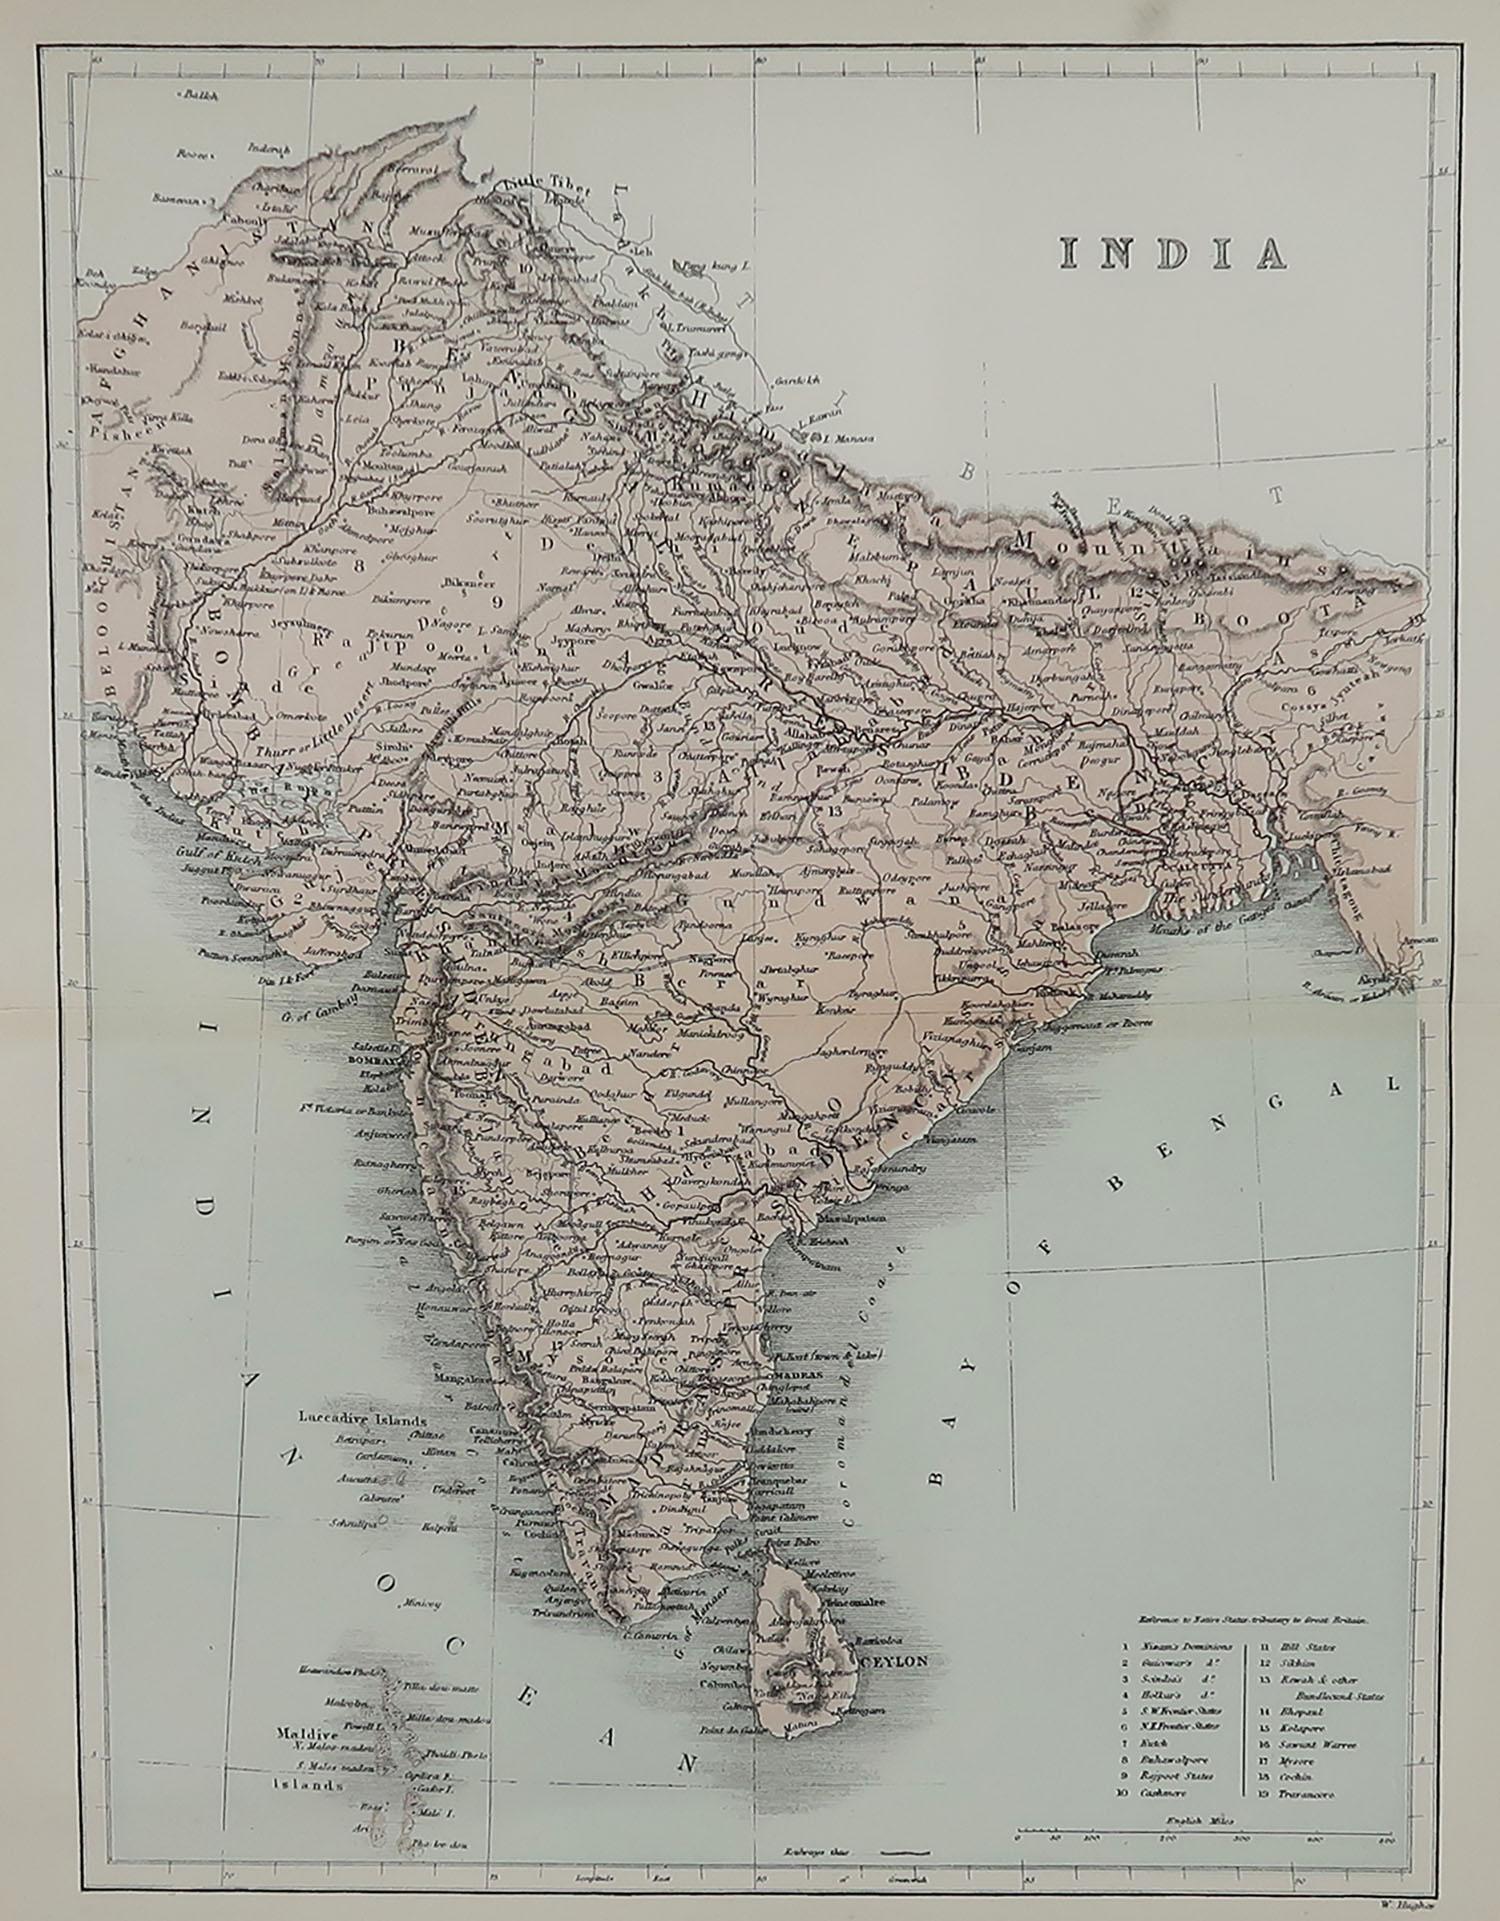 Super map of India

Cartography by William Hughes

Published by James Virtue, London, C.1850

Unframed.

 